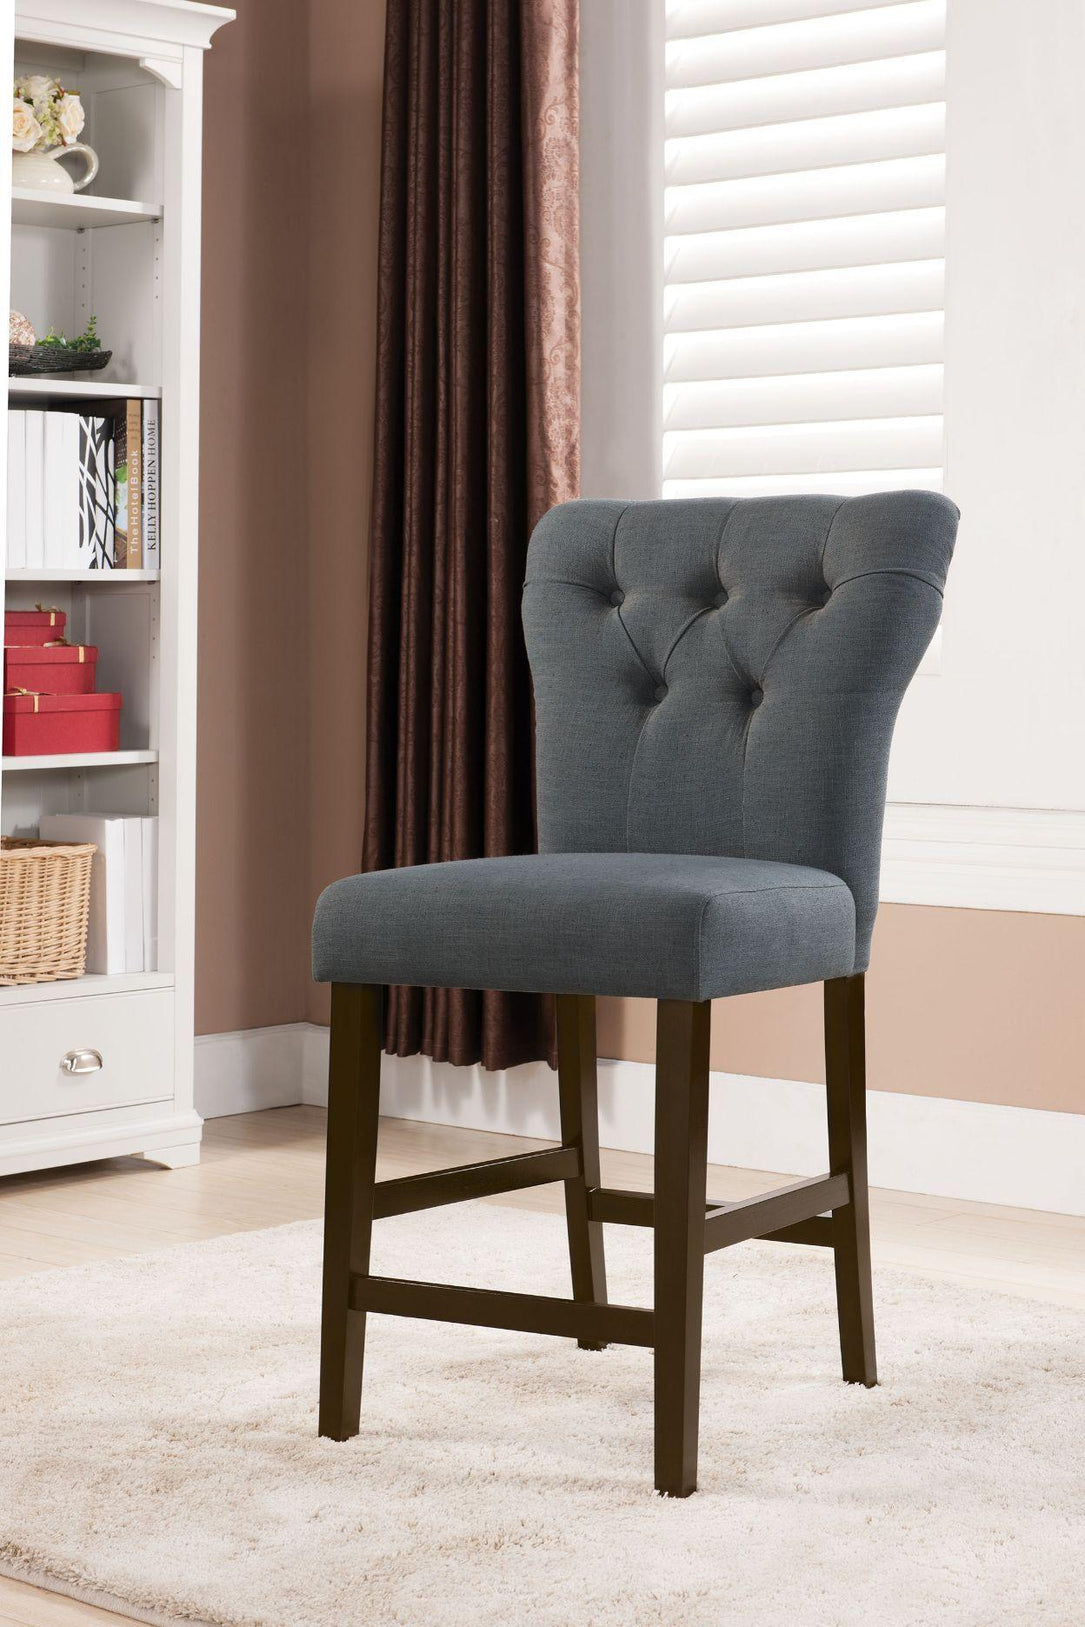 ACME - Effie - Counter Height Chair - 5th Avenue Furniture